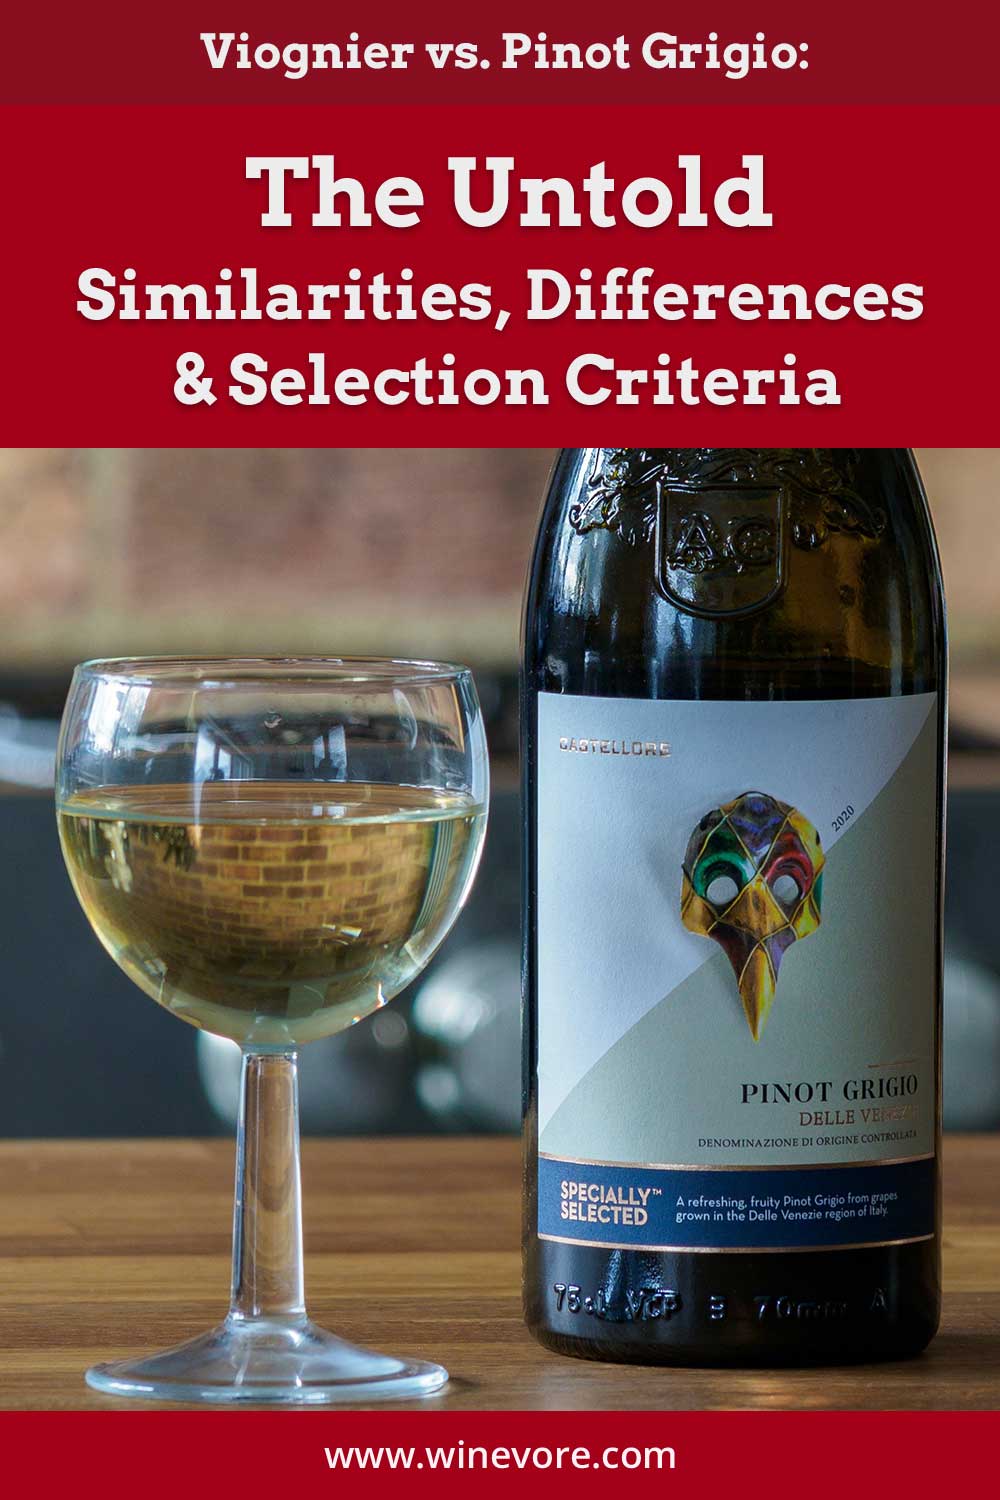 A glass of wine near a wine bottle on a wooden surface - Viognier vs. Pinot Grigio: Similarities, Differences & Selection Criteria